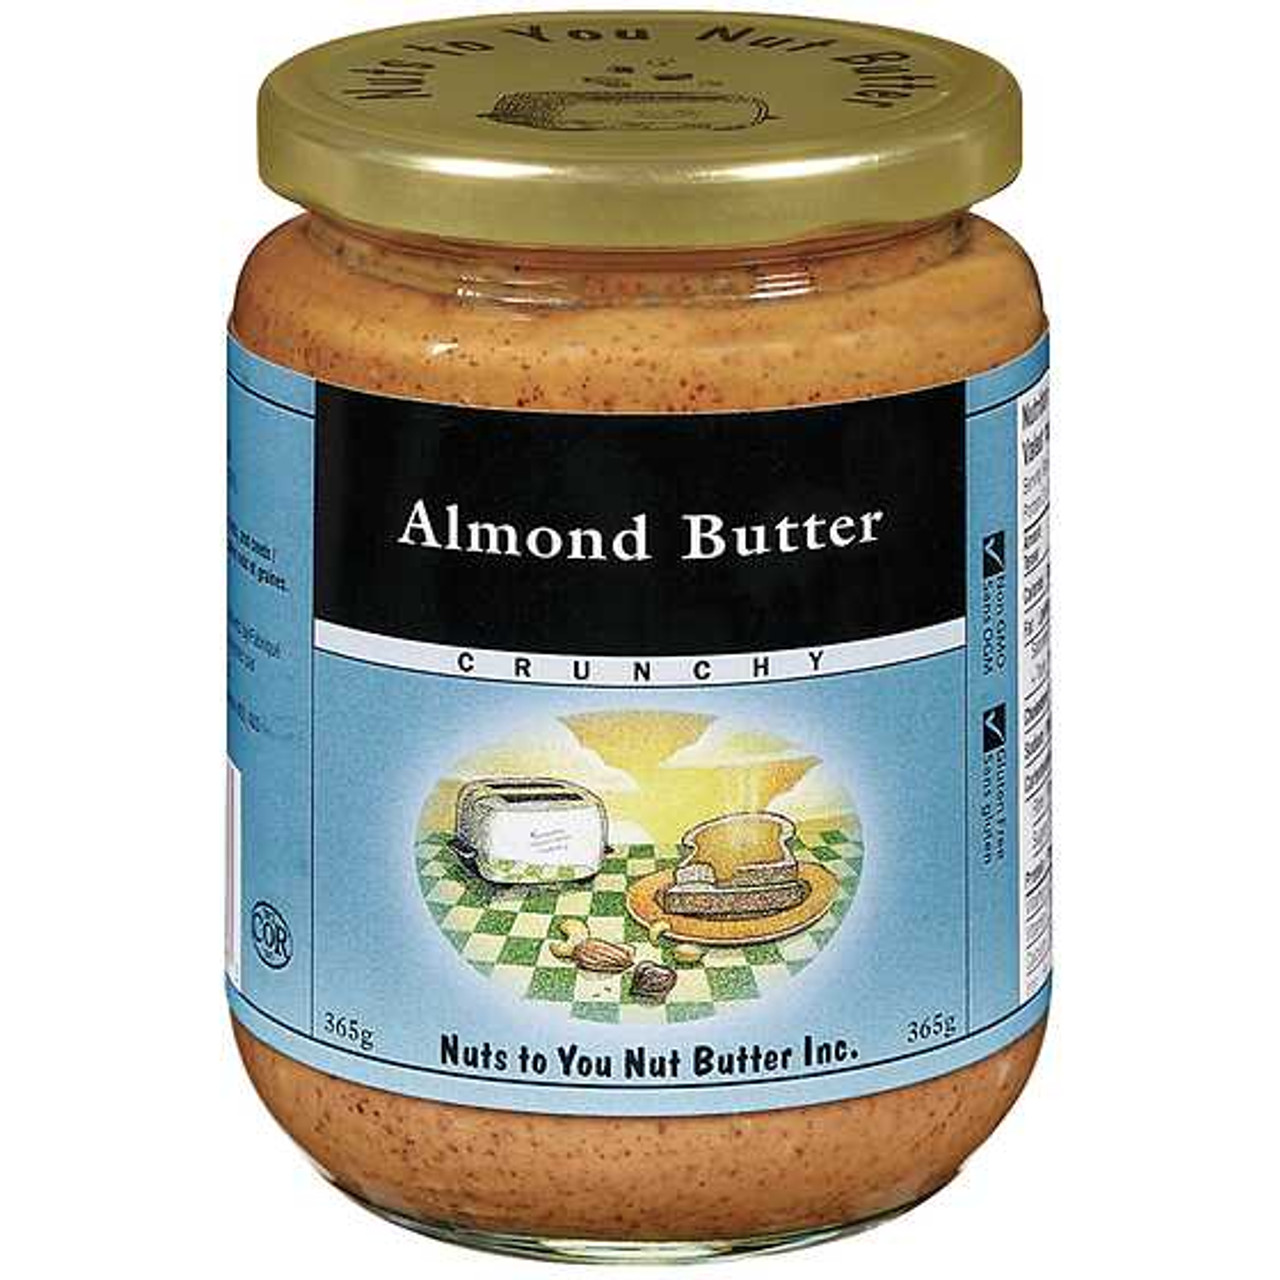 NUTS TO YOU Almond Butter, Crunchy 365 g NUTS TO YOU Chicken Pieces